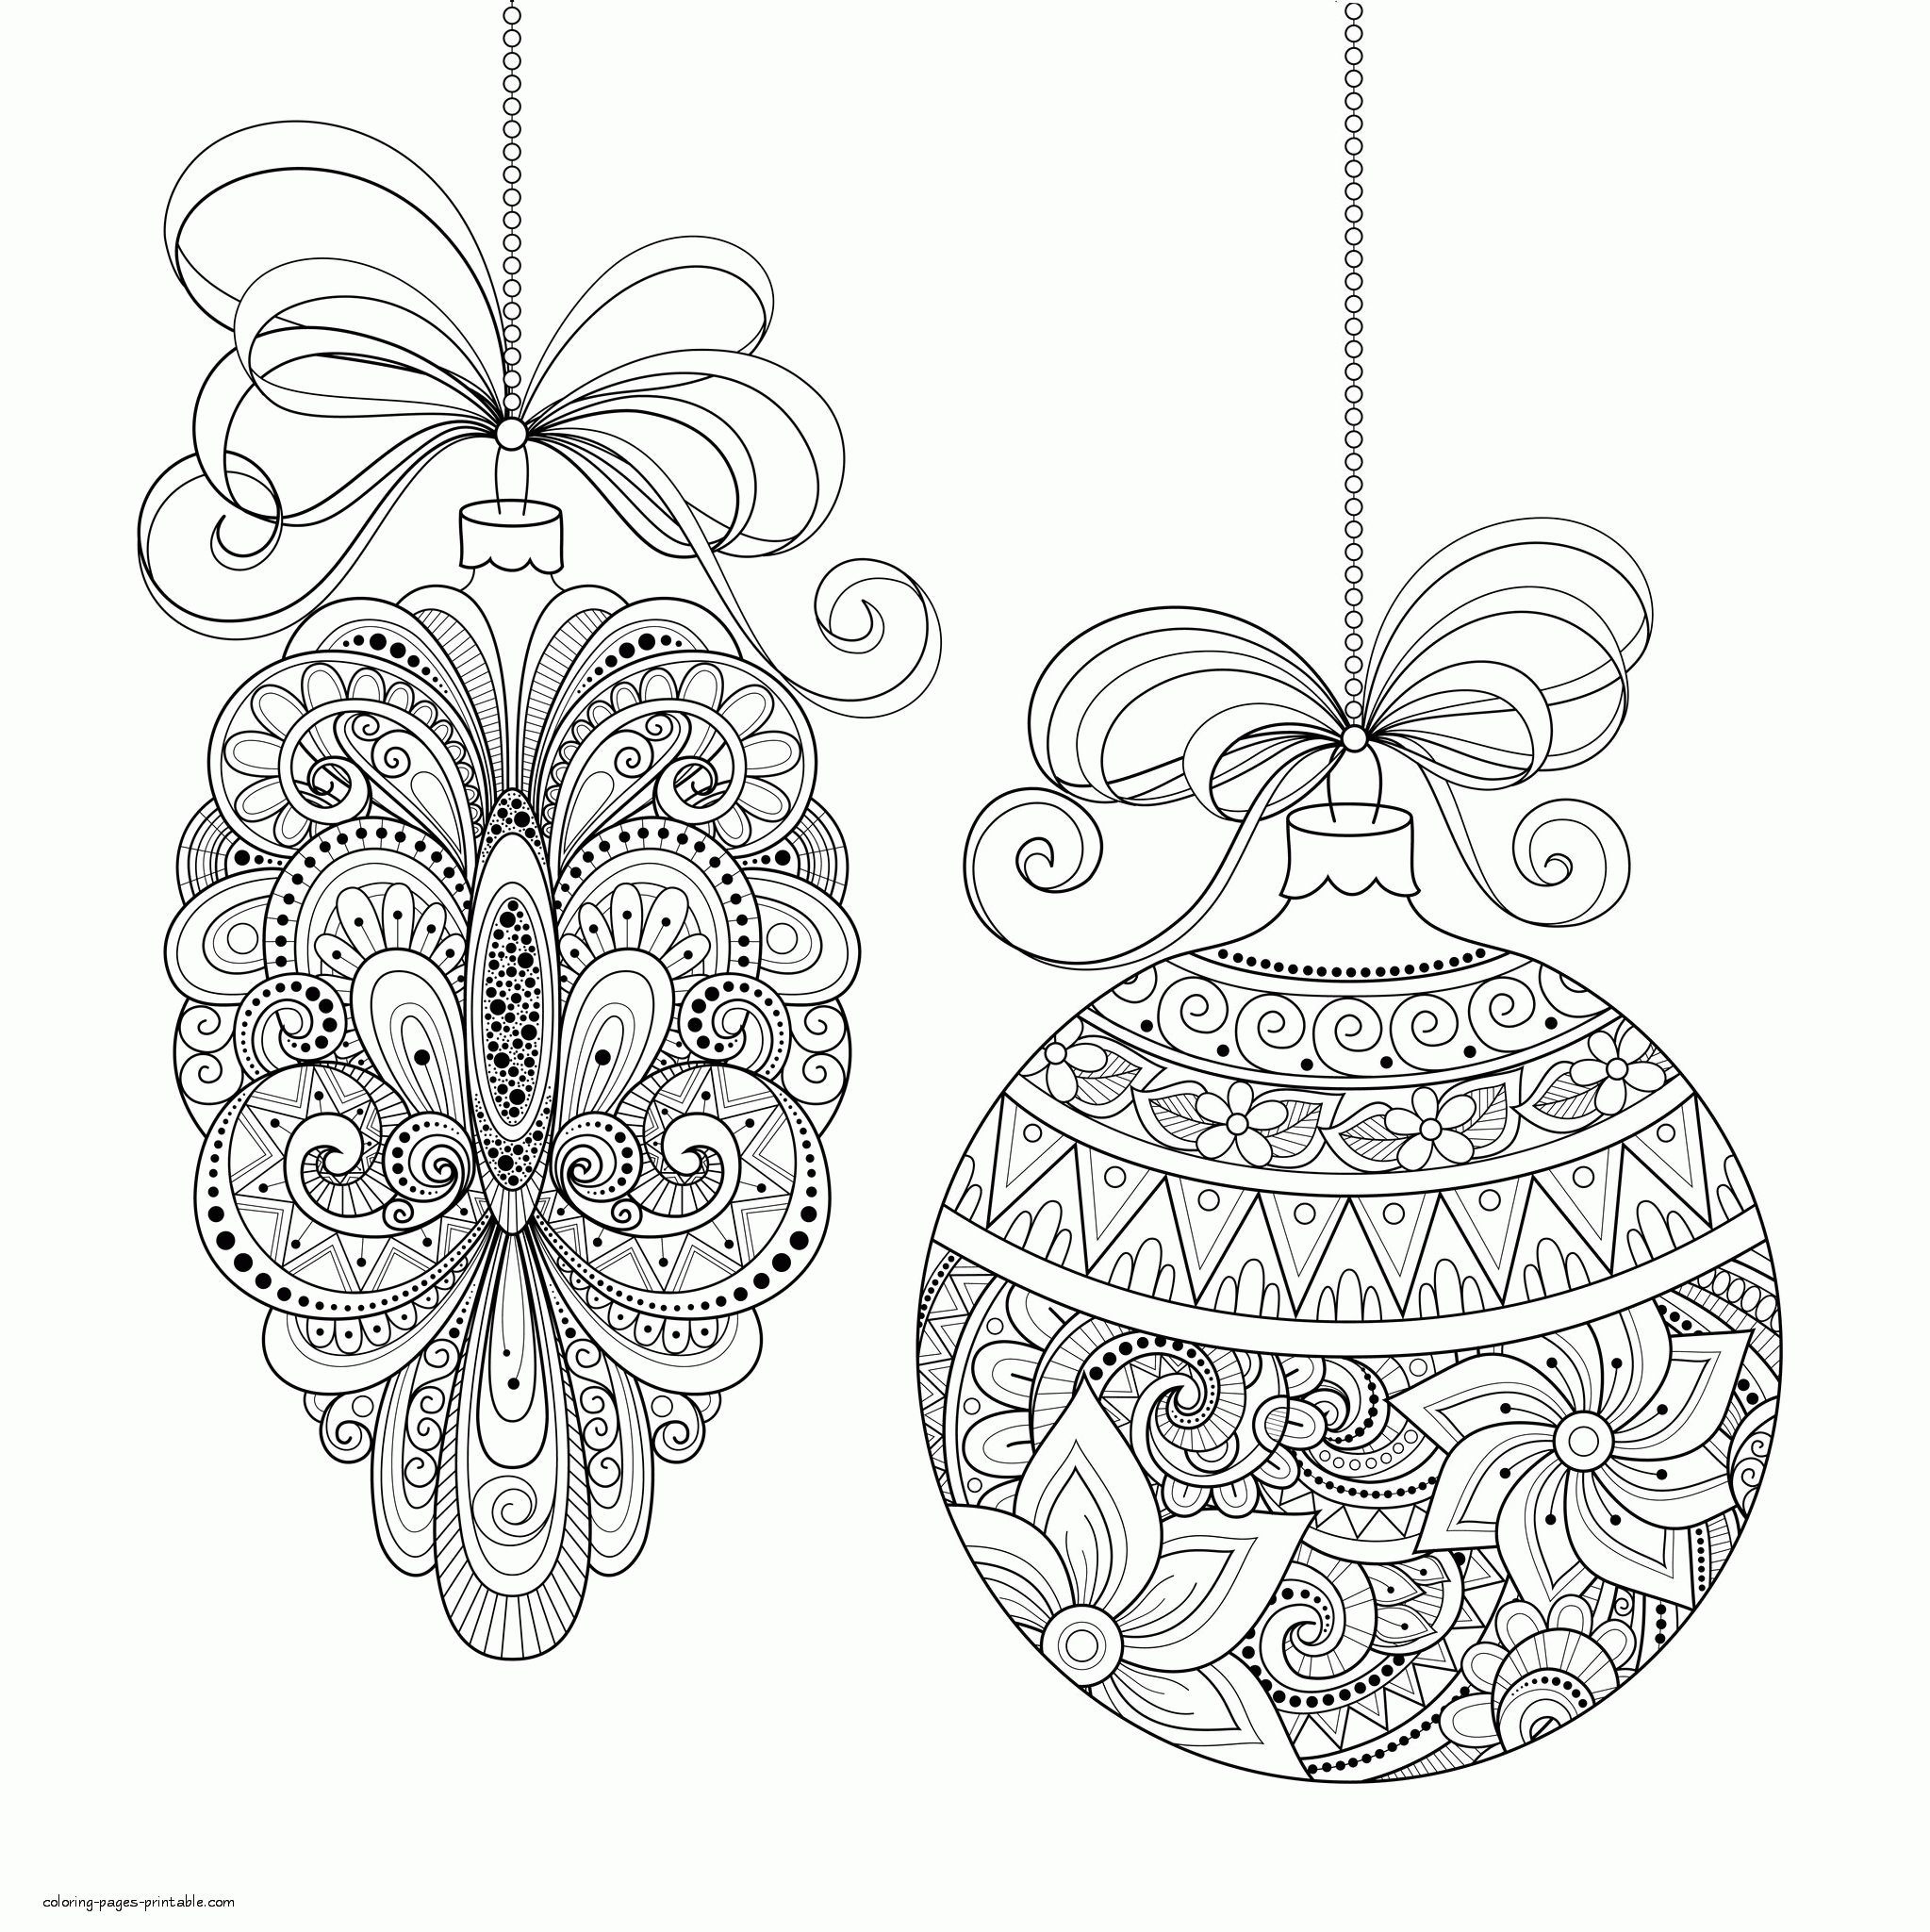 Free Adult Christmas Coloring Pages. Awesome decorations